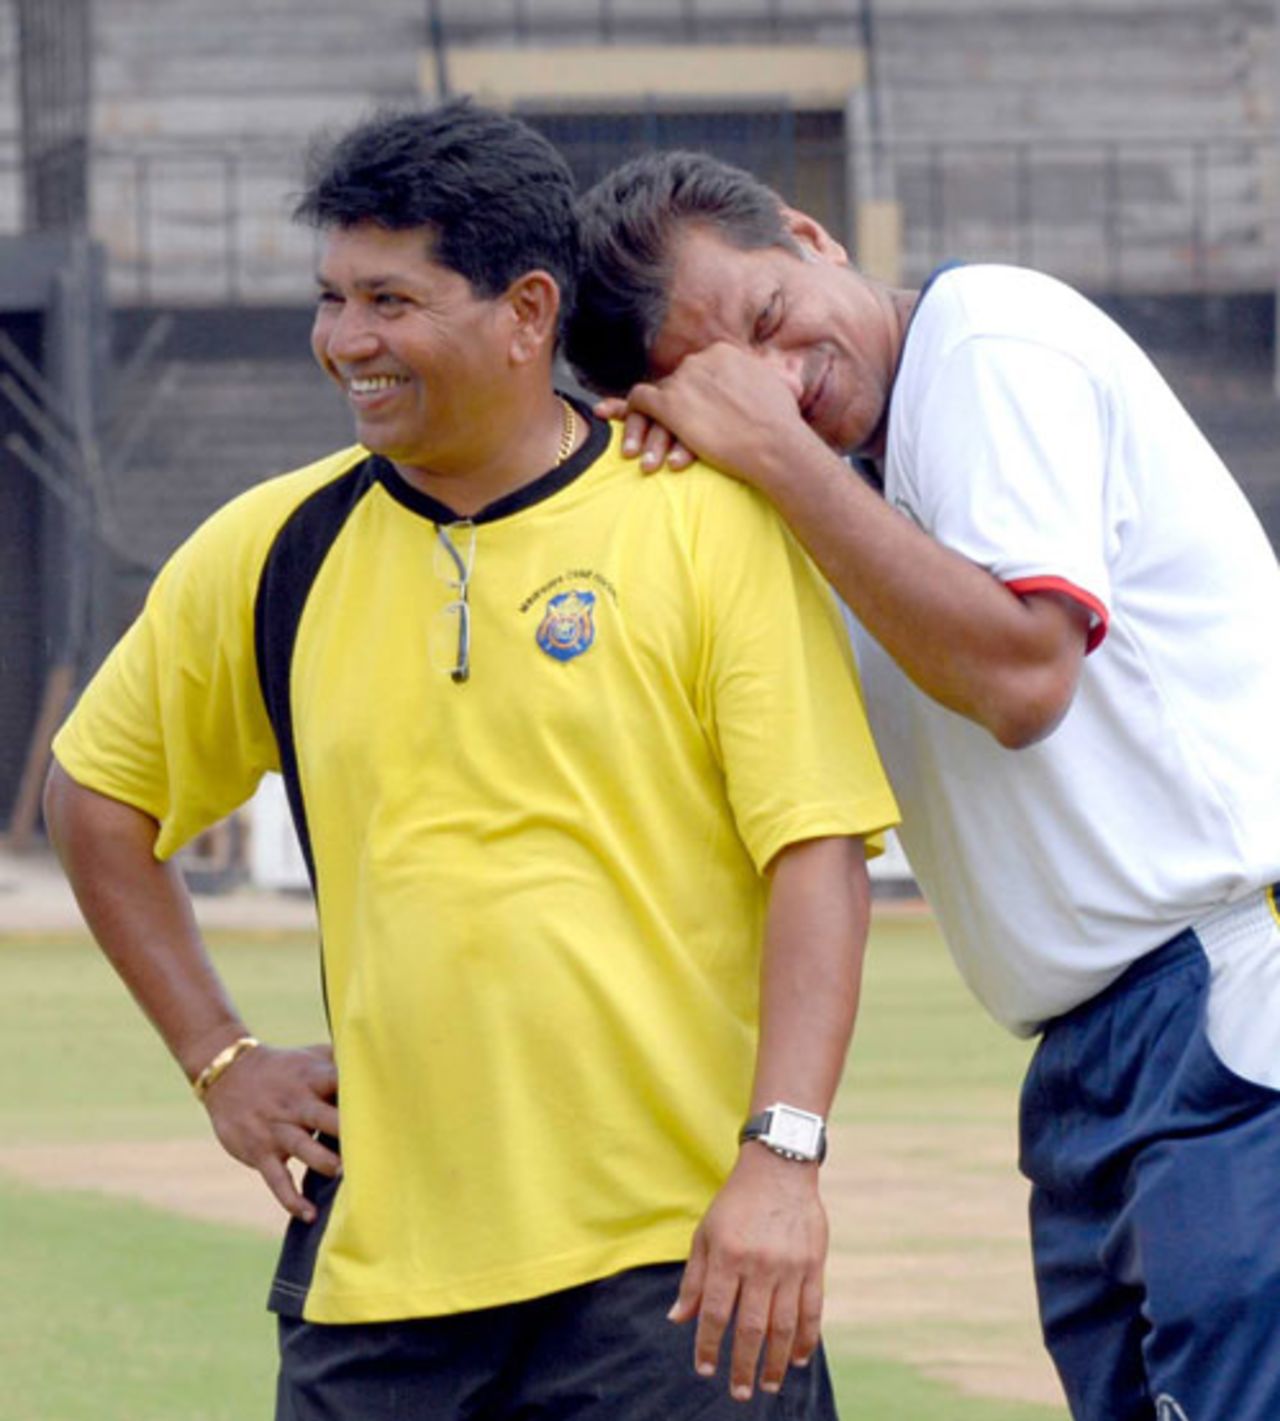 Chandrakant Pandit and WV Raman, former India players now coaching Maharashtra and Tamil Nadu respectively, have found something funny at the training session on the eve of their match, Tamil Nadu v Maharashtra, Ranji Trophy Super League, 1st round, Chennai, November 2, 2007